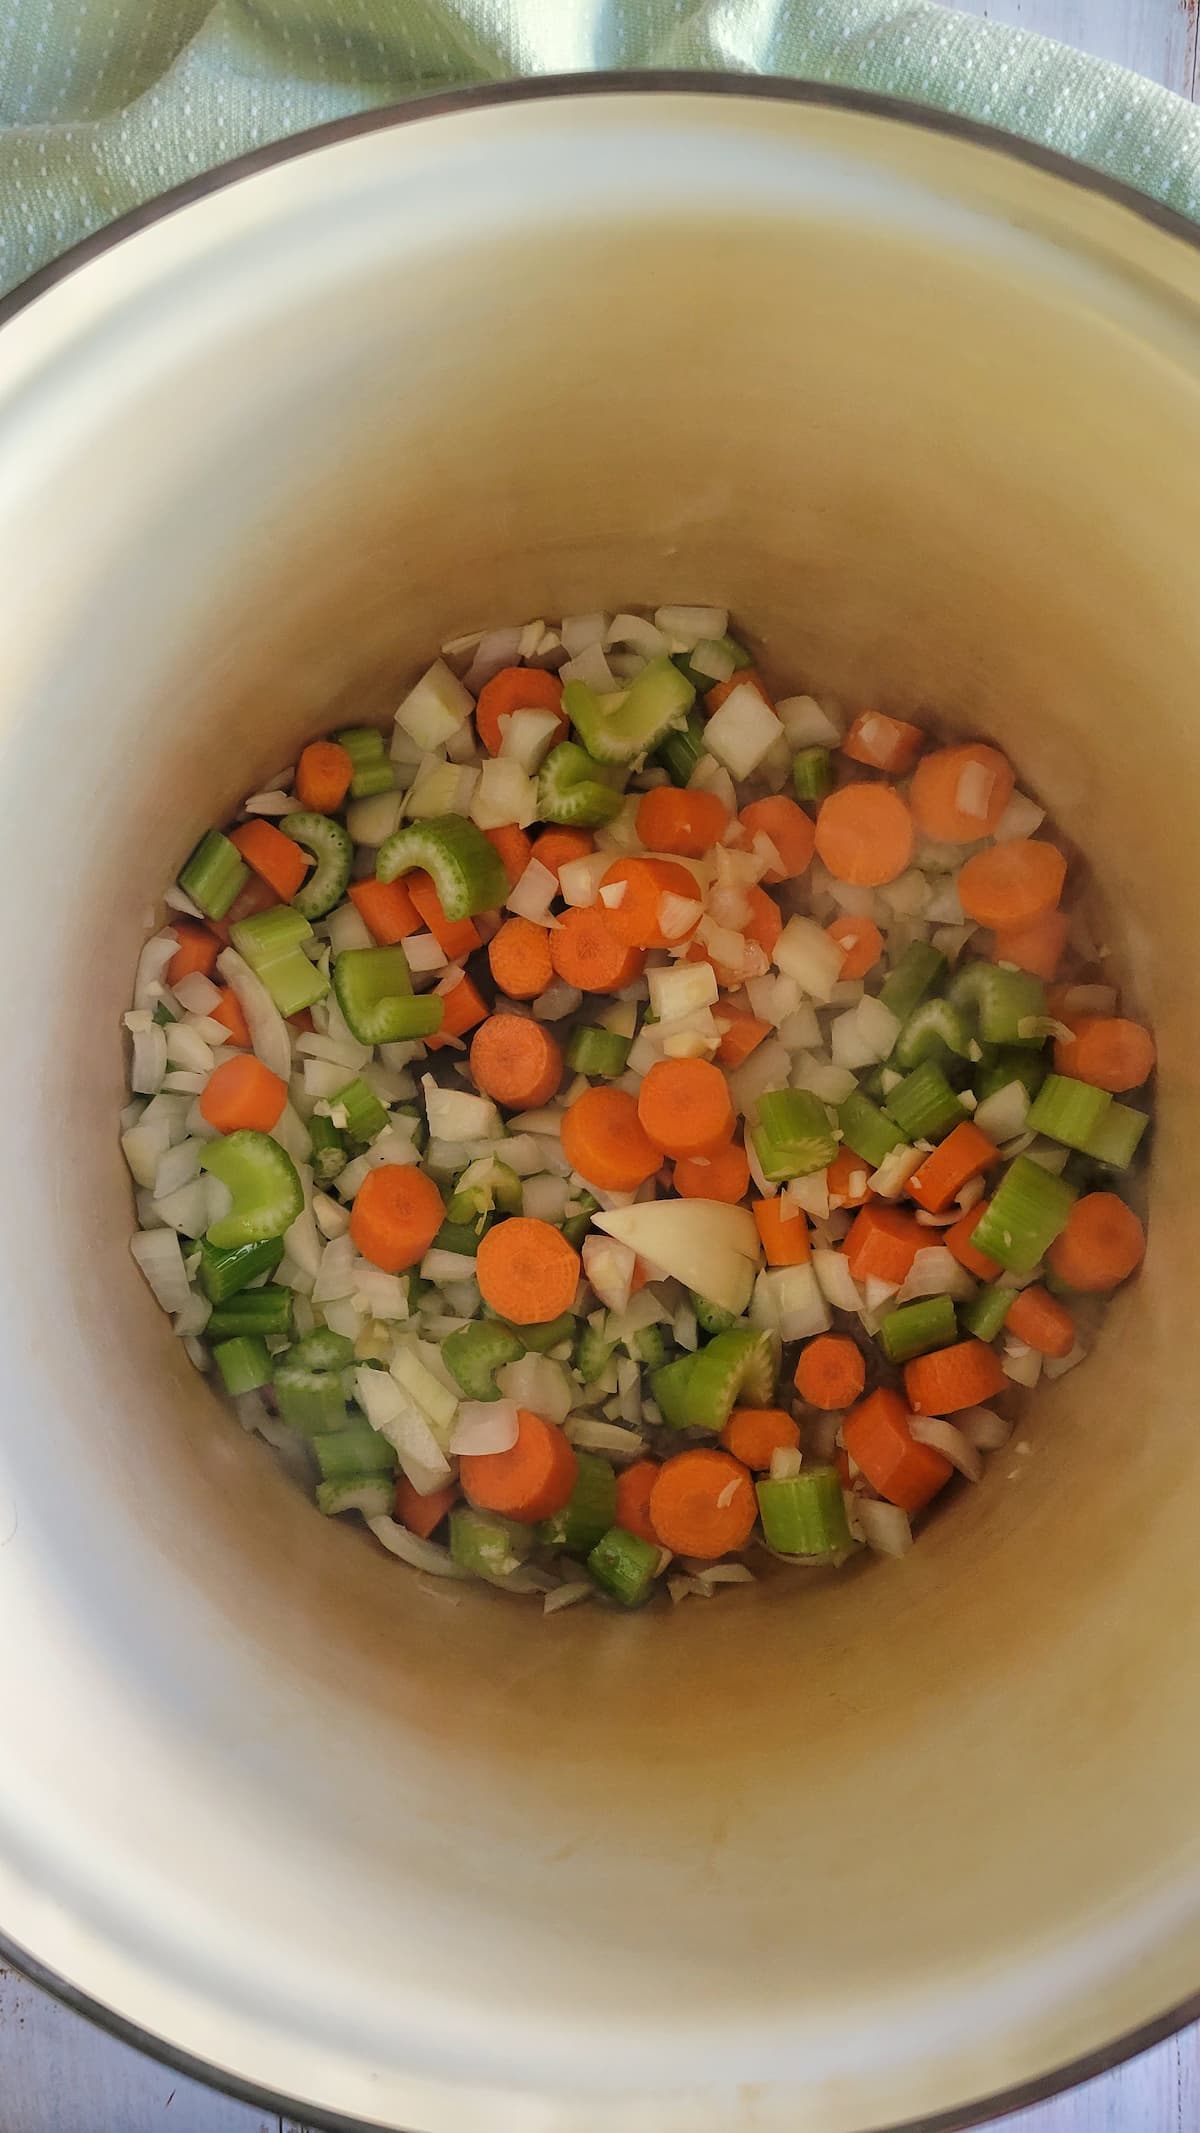 diced carrots, celery, onions and garlic in a pot